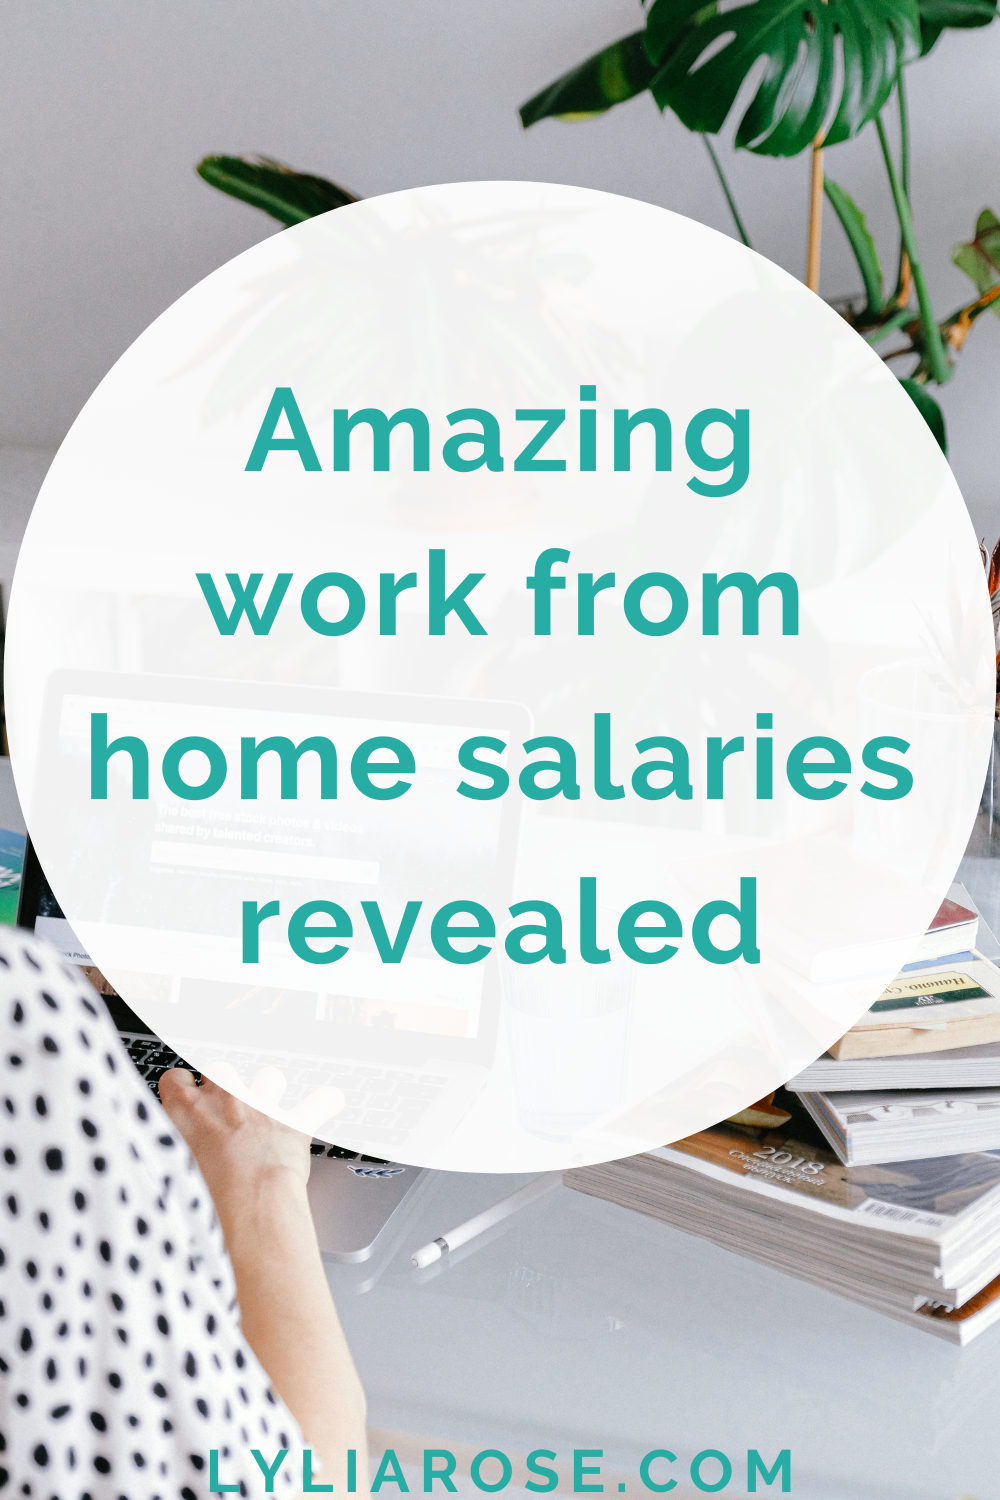 Amazing work from home salaries revealed